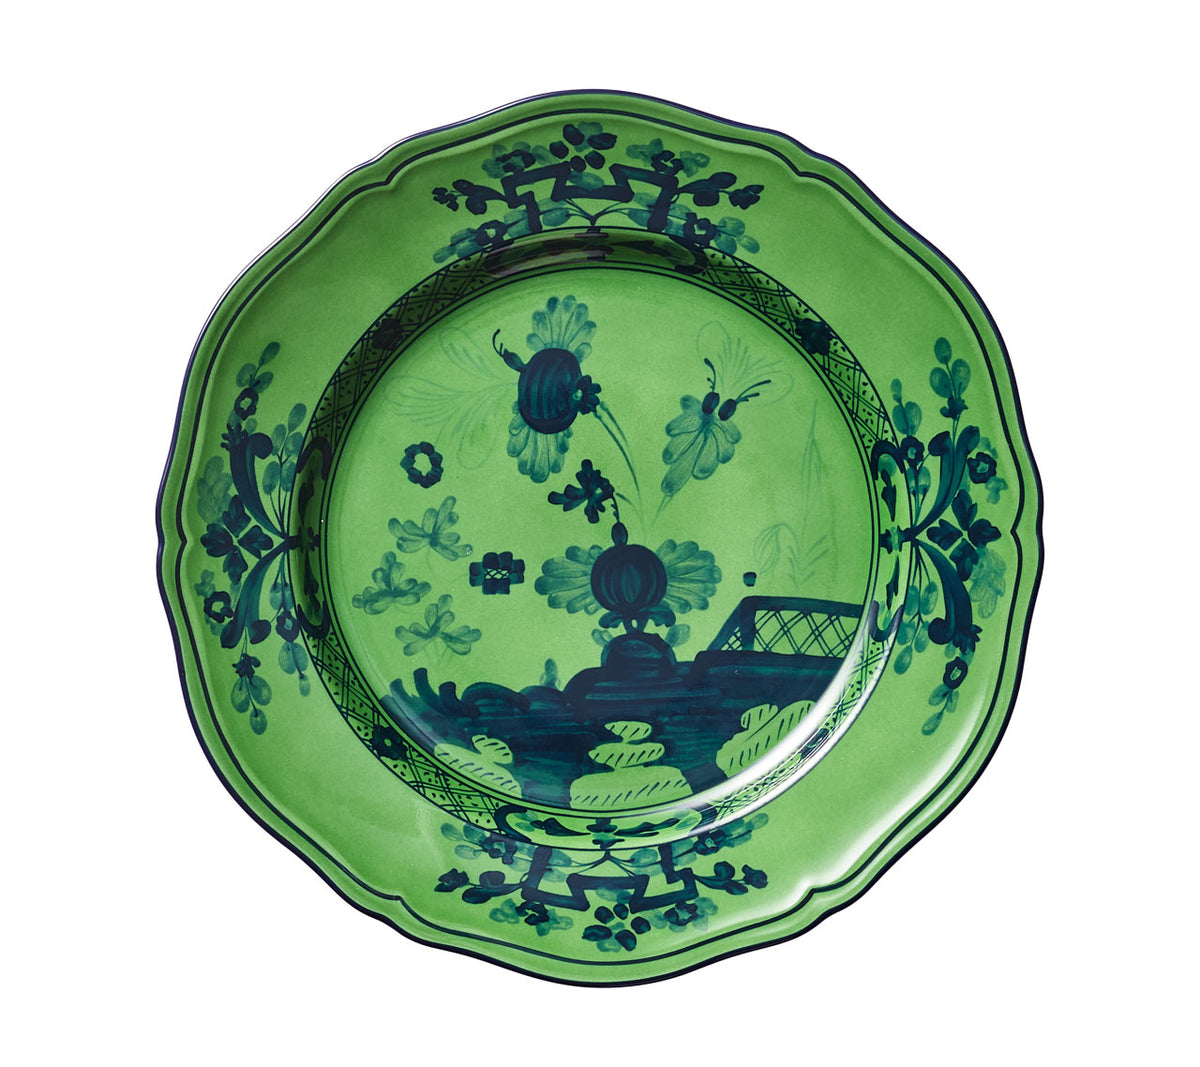 Green porcelain Oriente Italiano Dinner Plate, Malachite, with stylized carnations